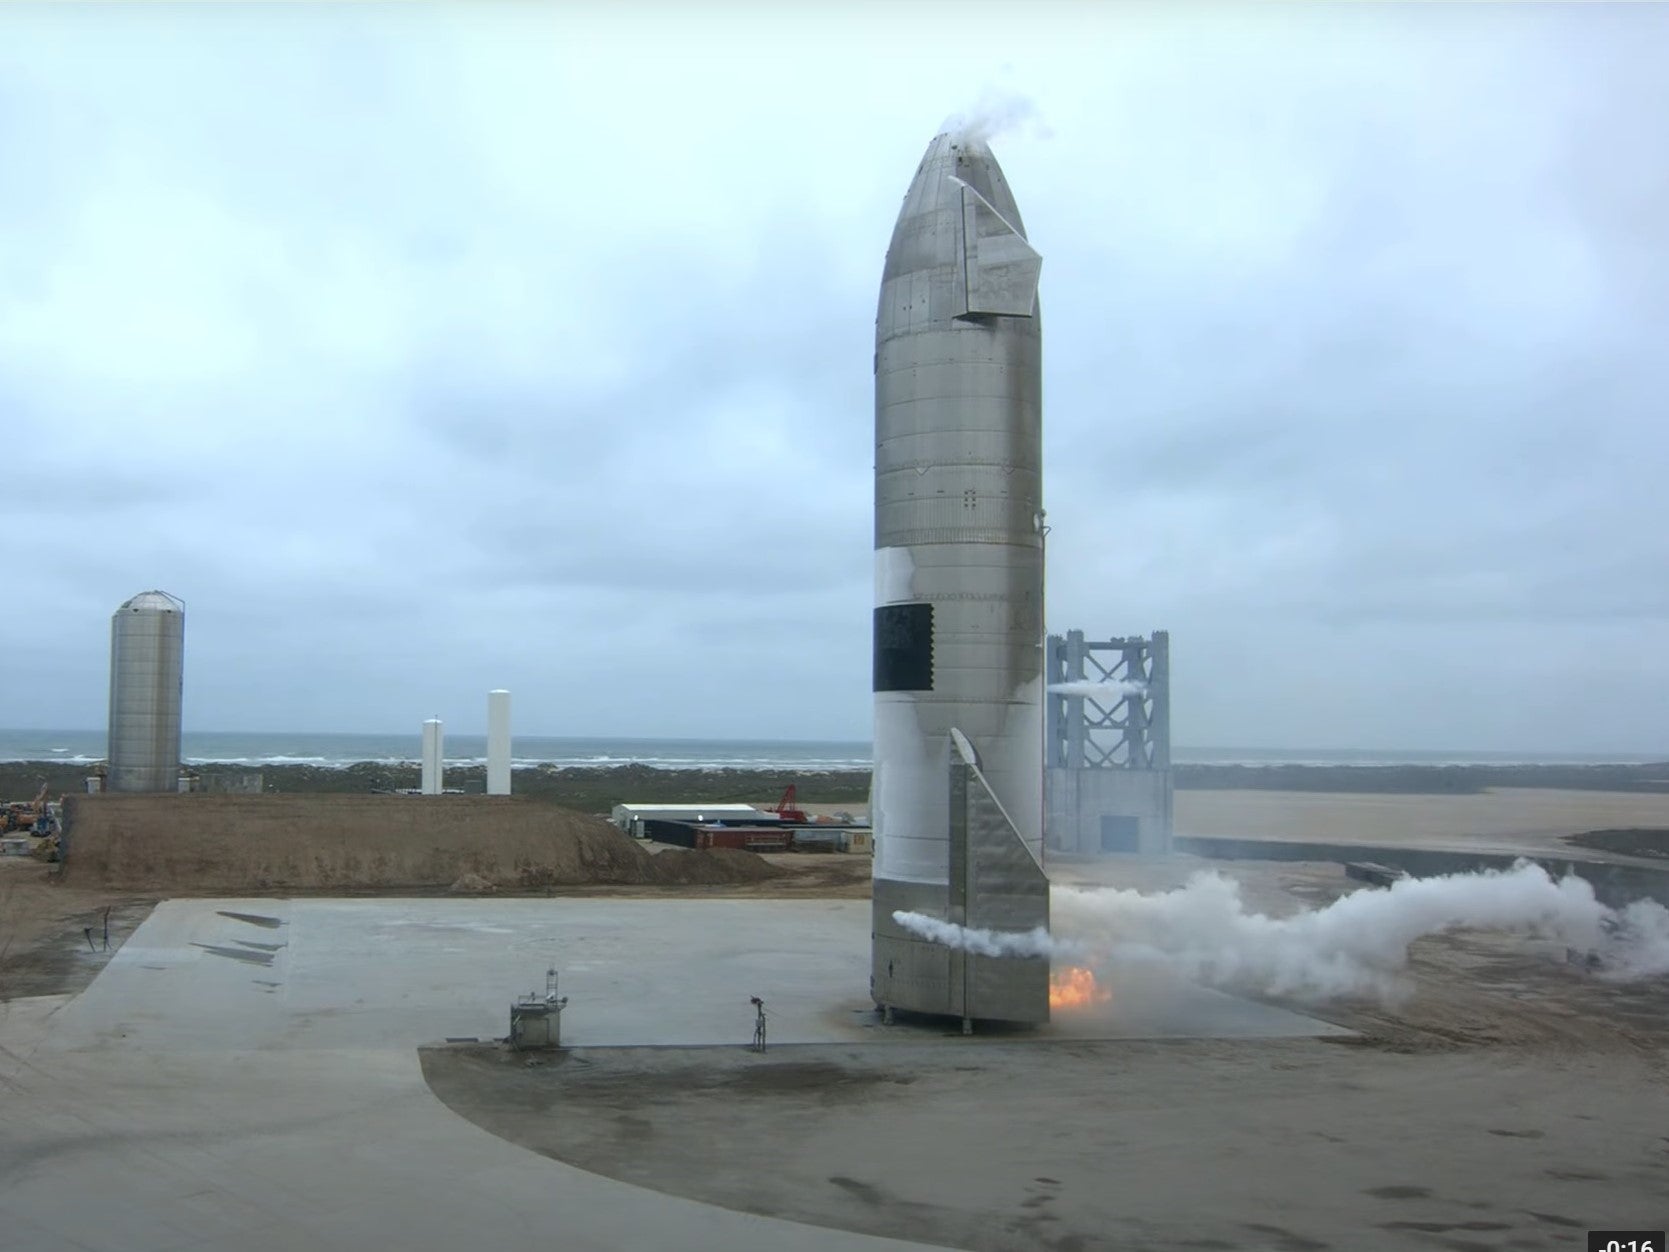 Starship SN15 launched and landed successfully at SpaceX’s Starbase facility in Boca Chica, Texas, on 5 May, 2021